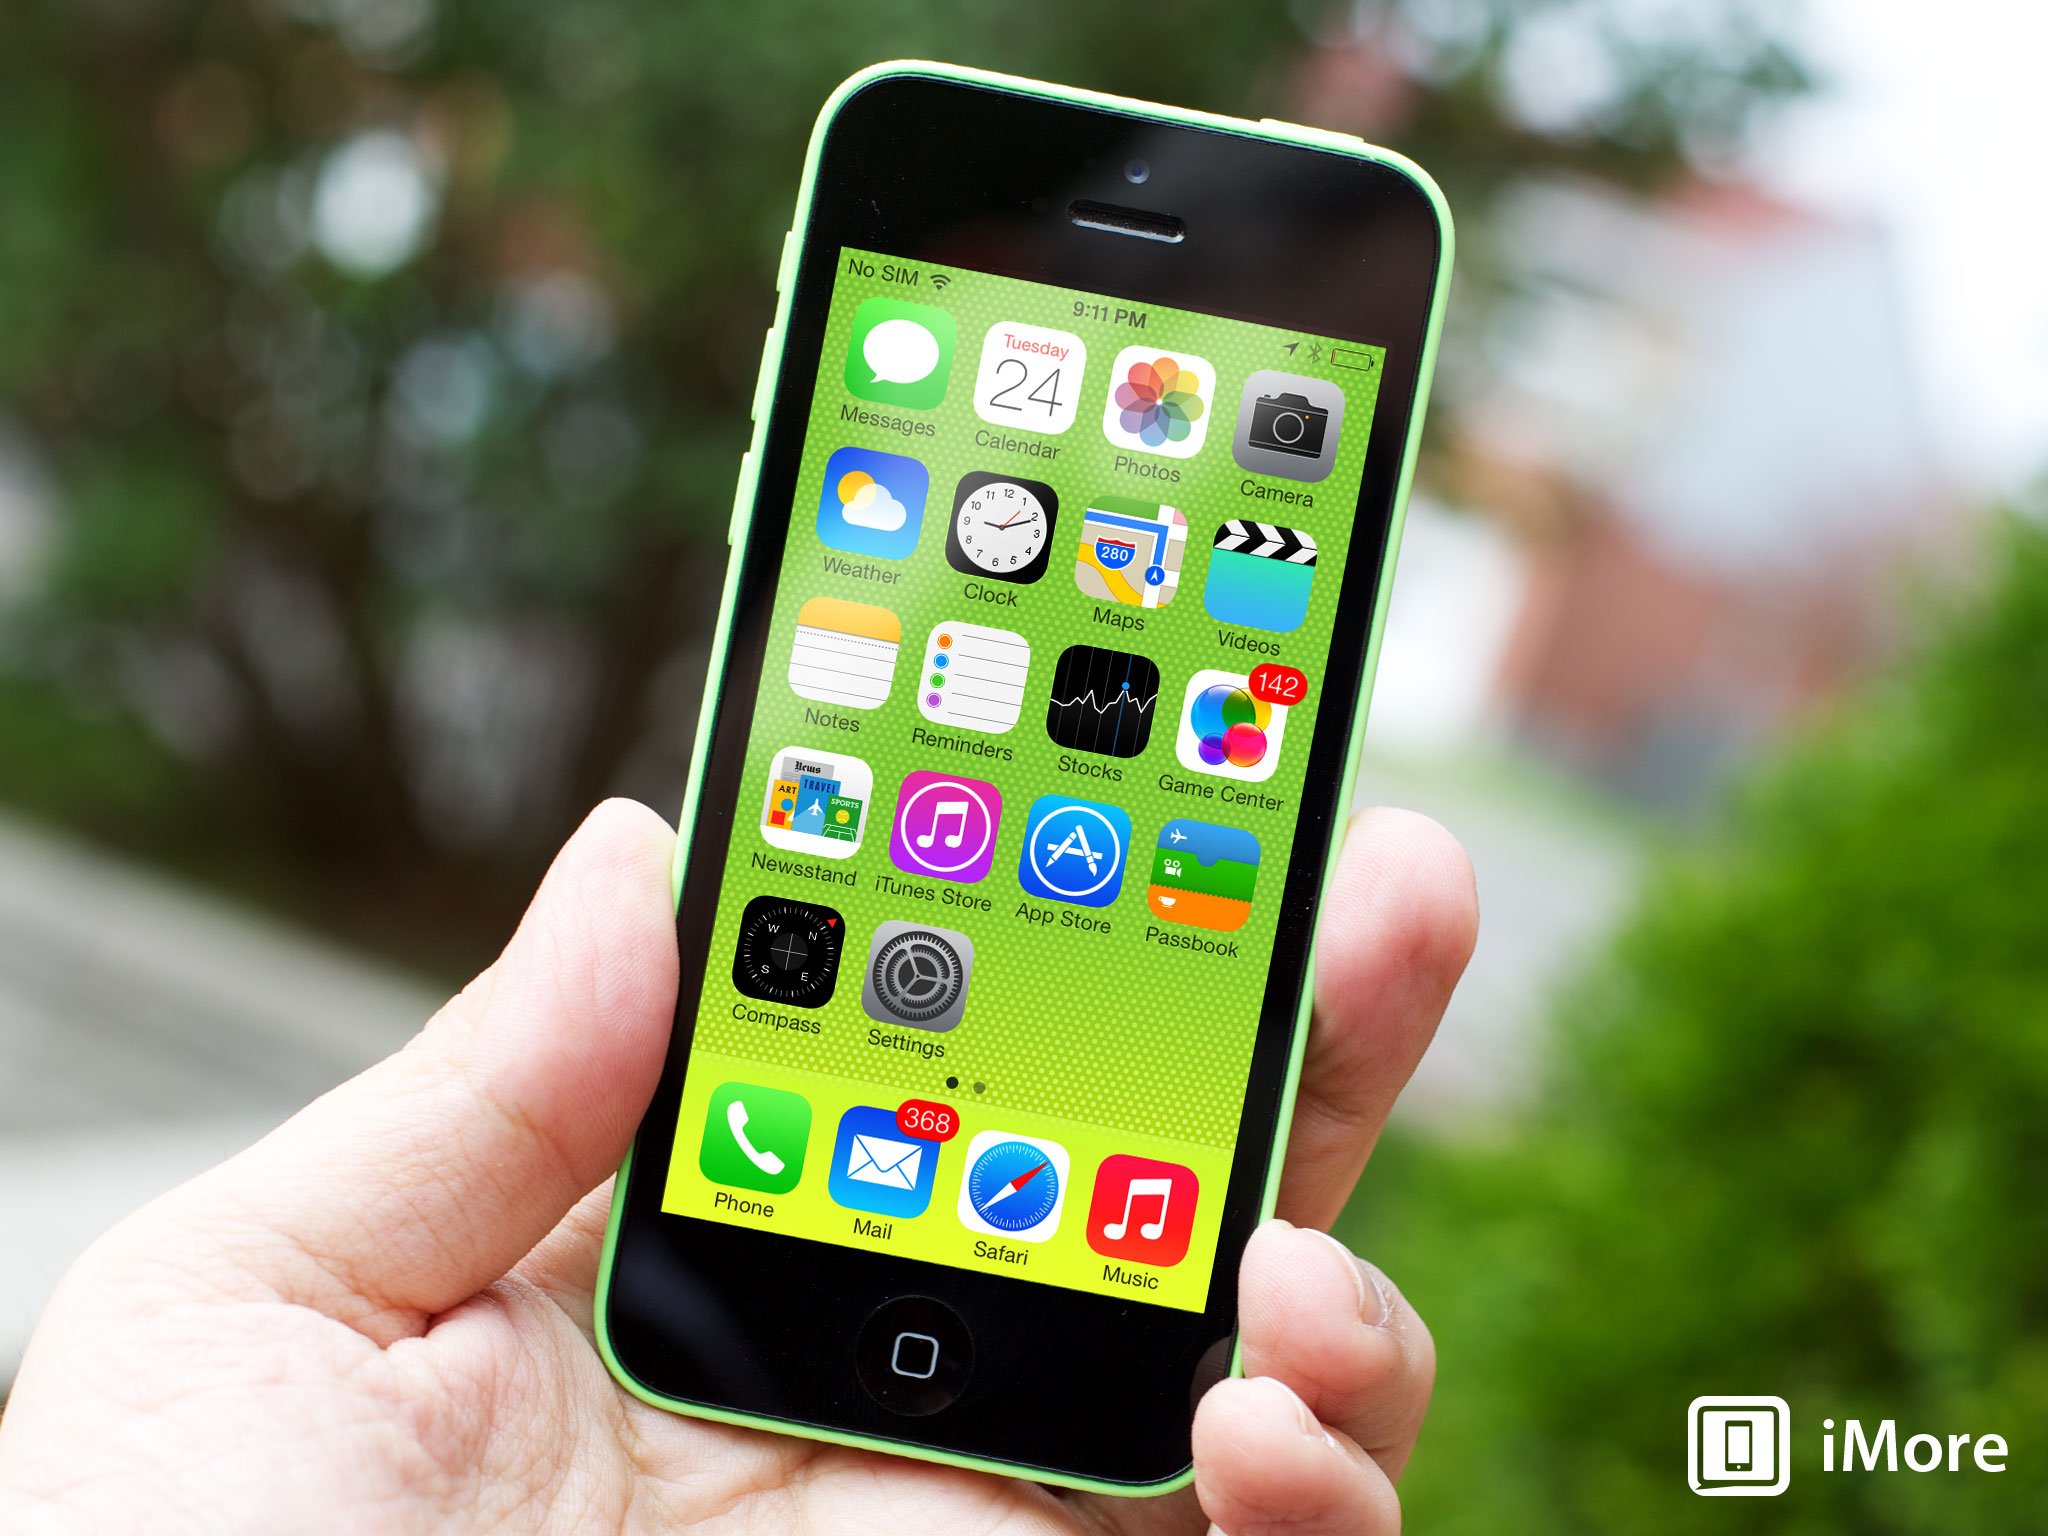 History of iPhone 5c: The most colorful iPhone yet